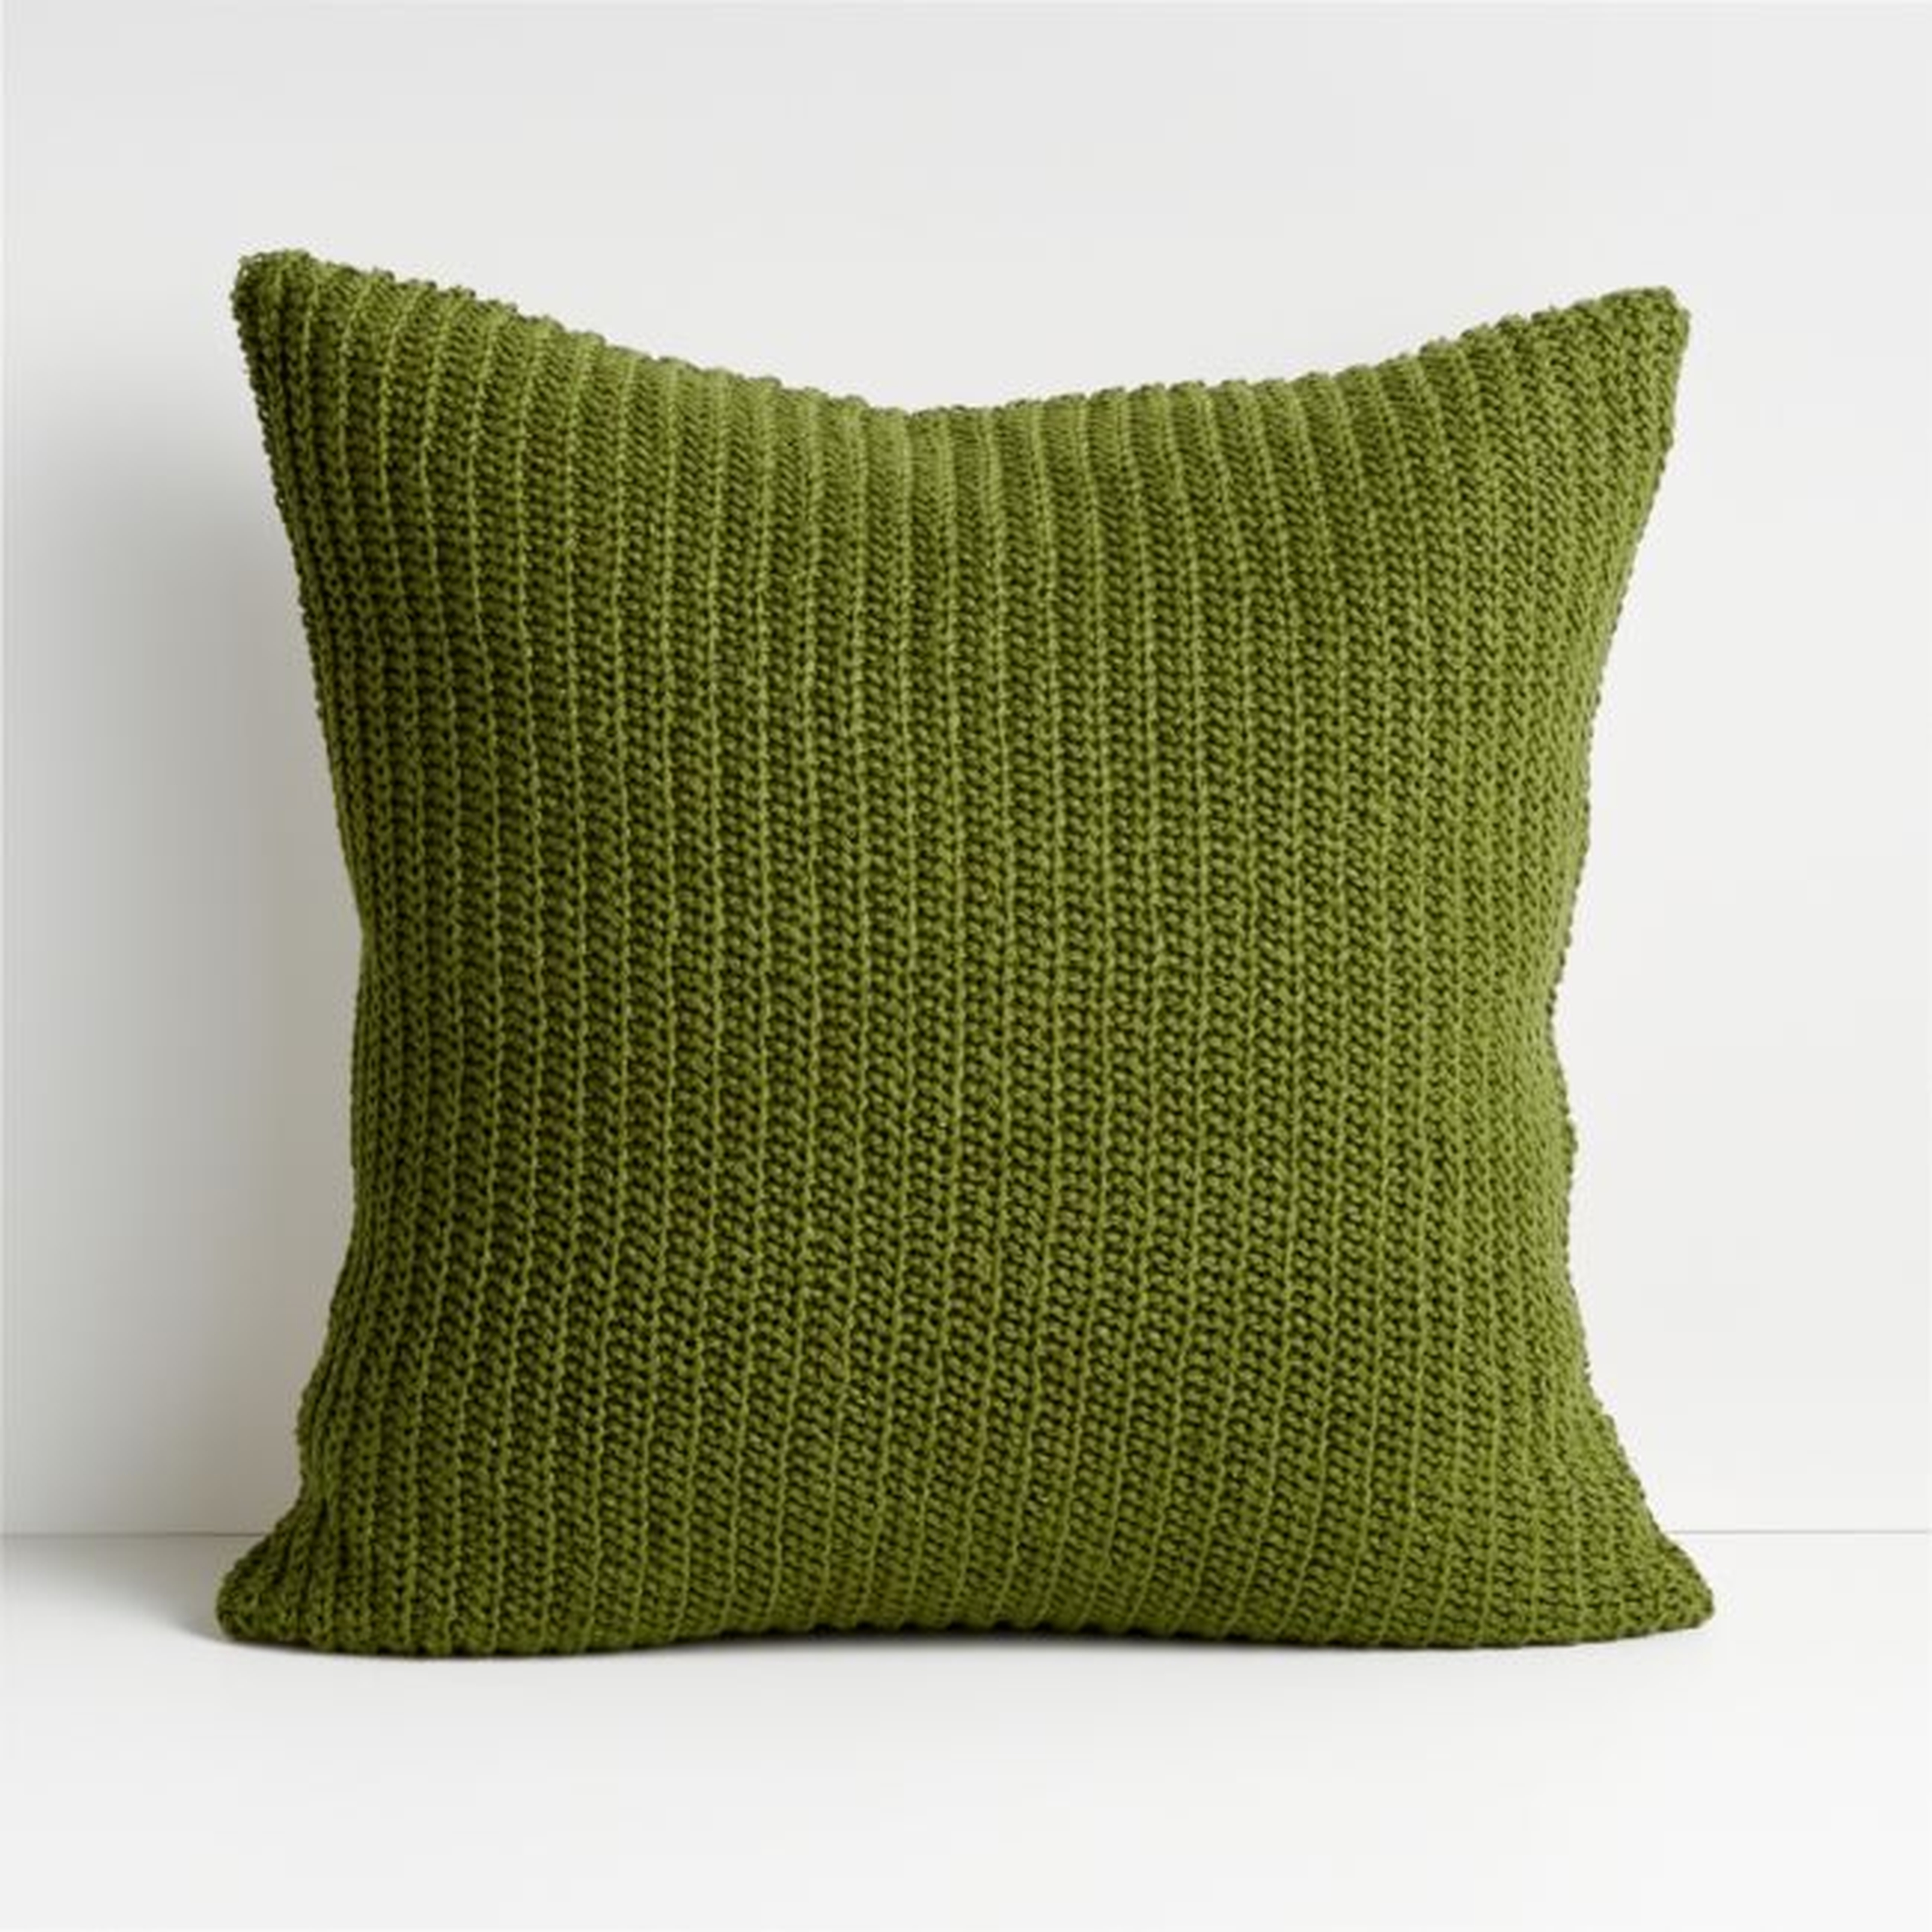 Croft 20" Olive Branch Crochet Pillow with Down-Alternative Insert - Crate and Barrel